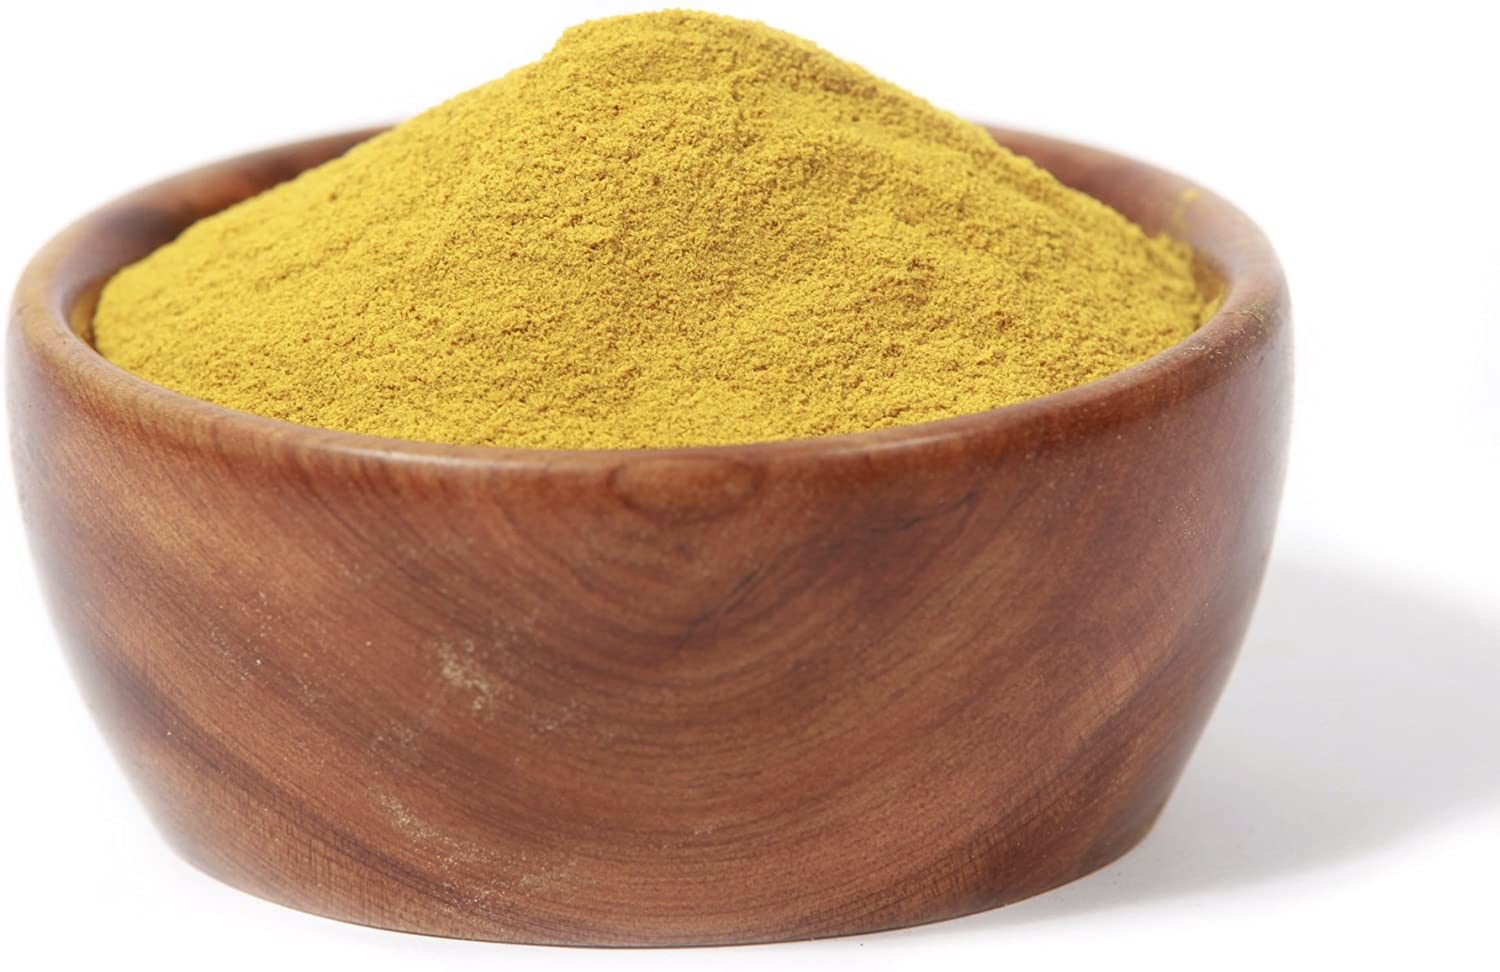 Golden Seal Extract